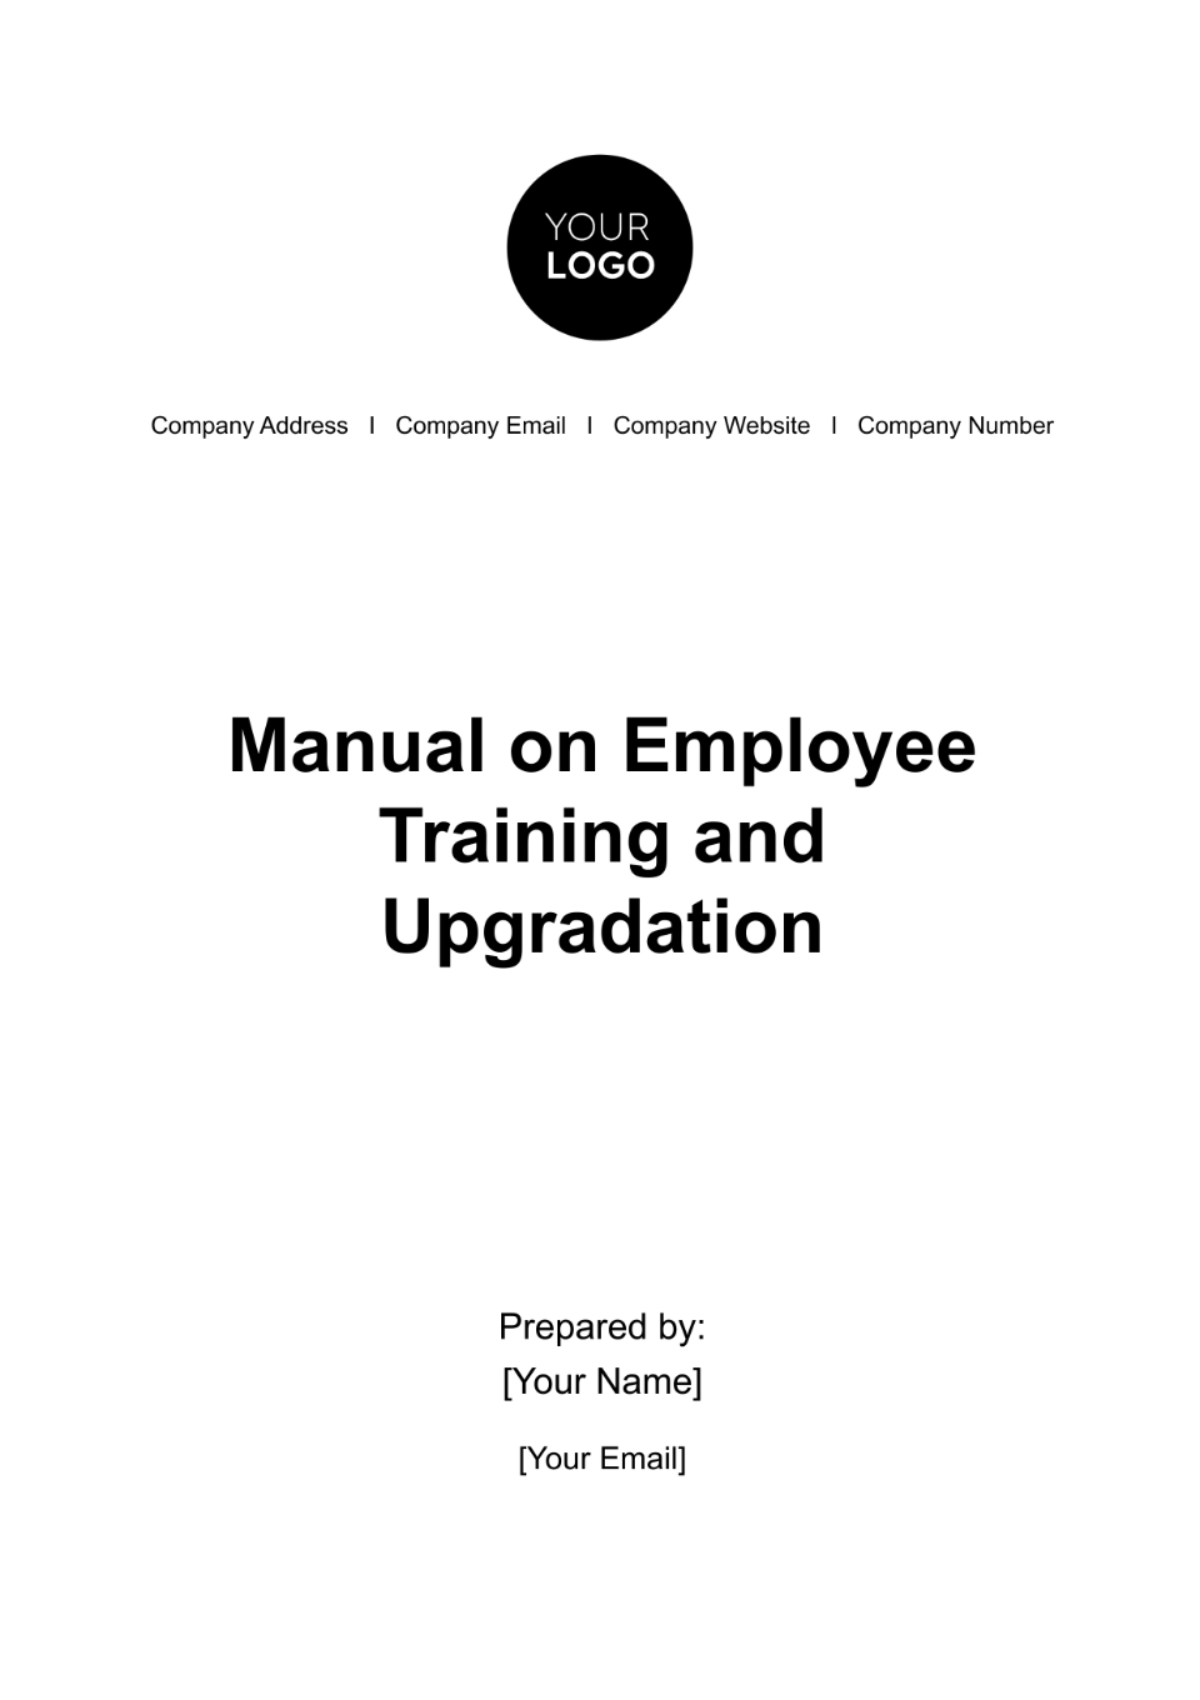 Manual on Employee Training and Upgradation HR Template